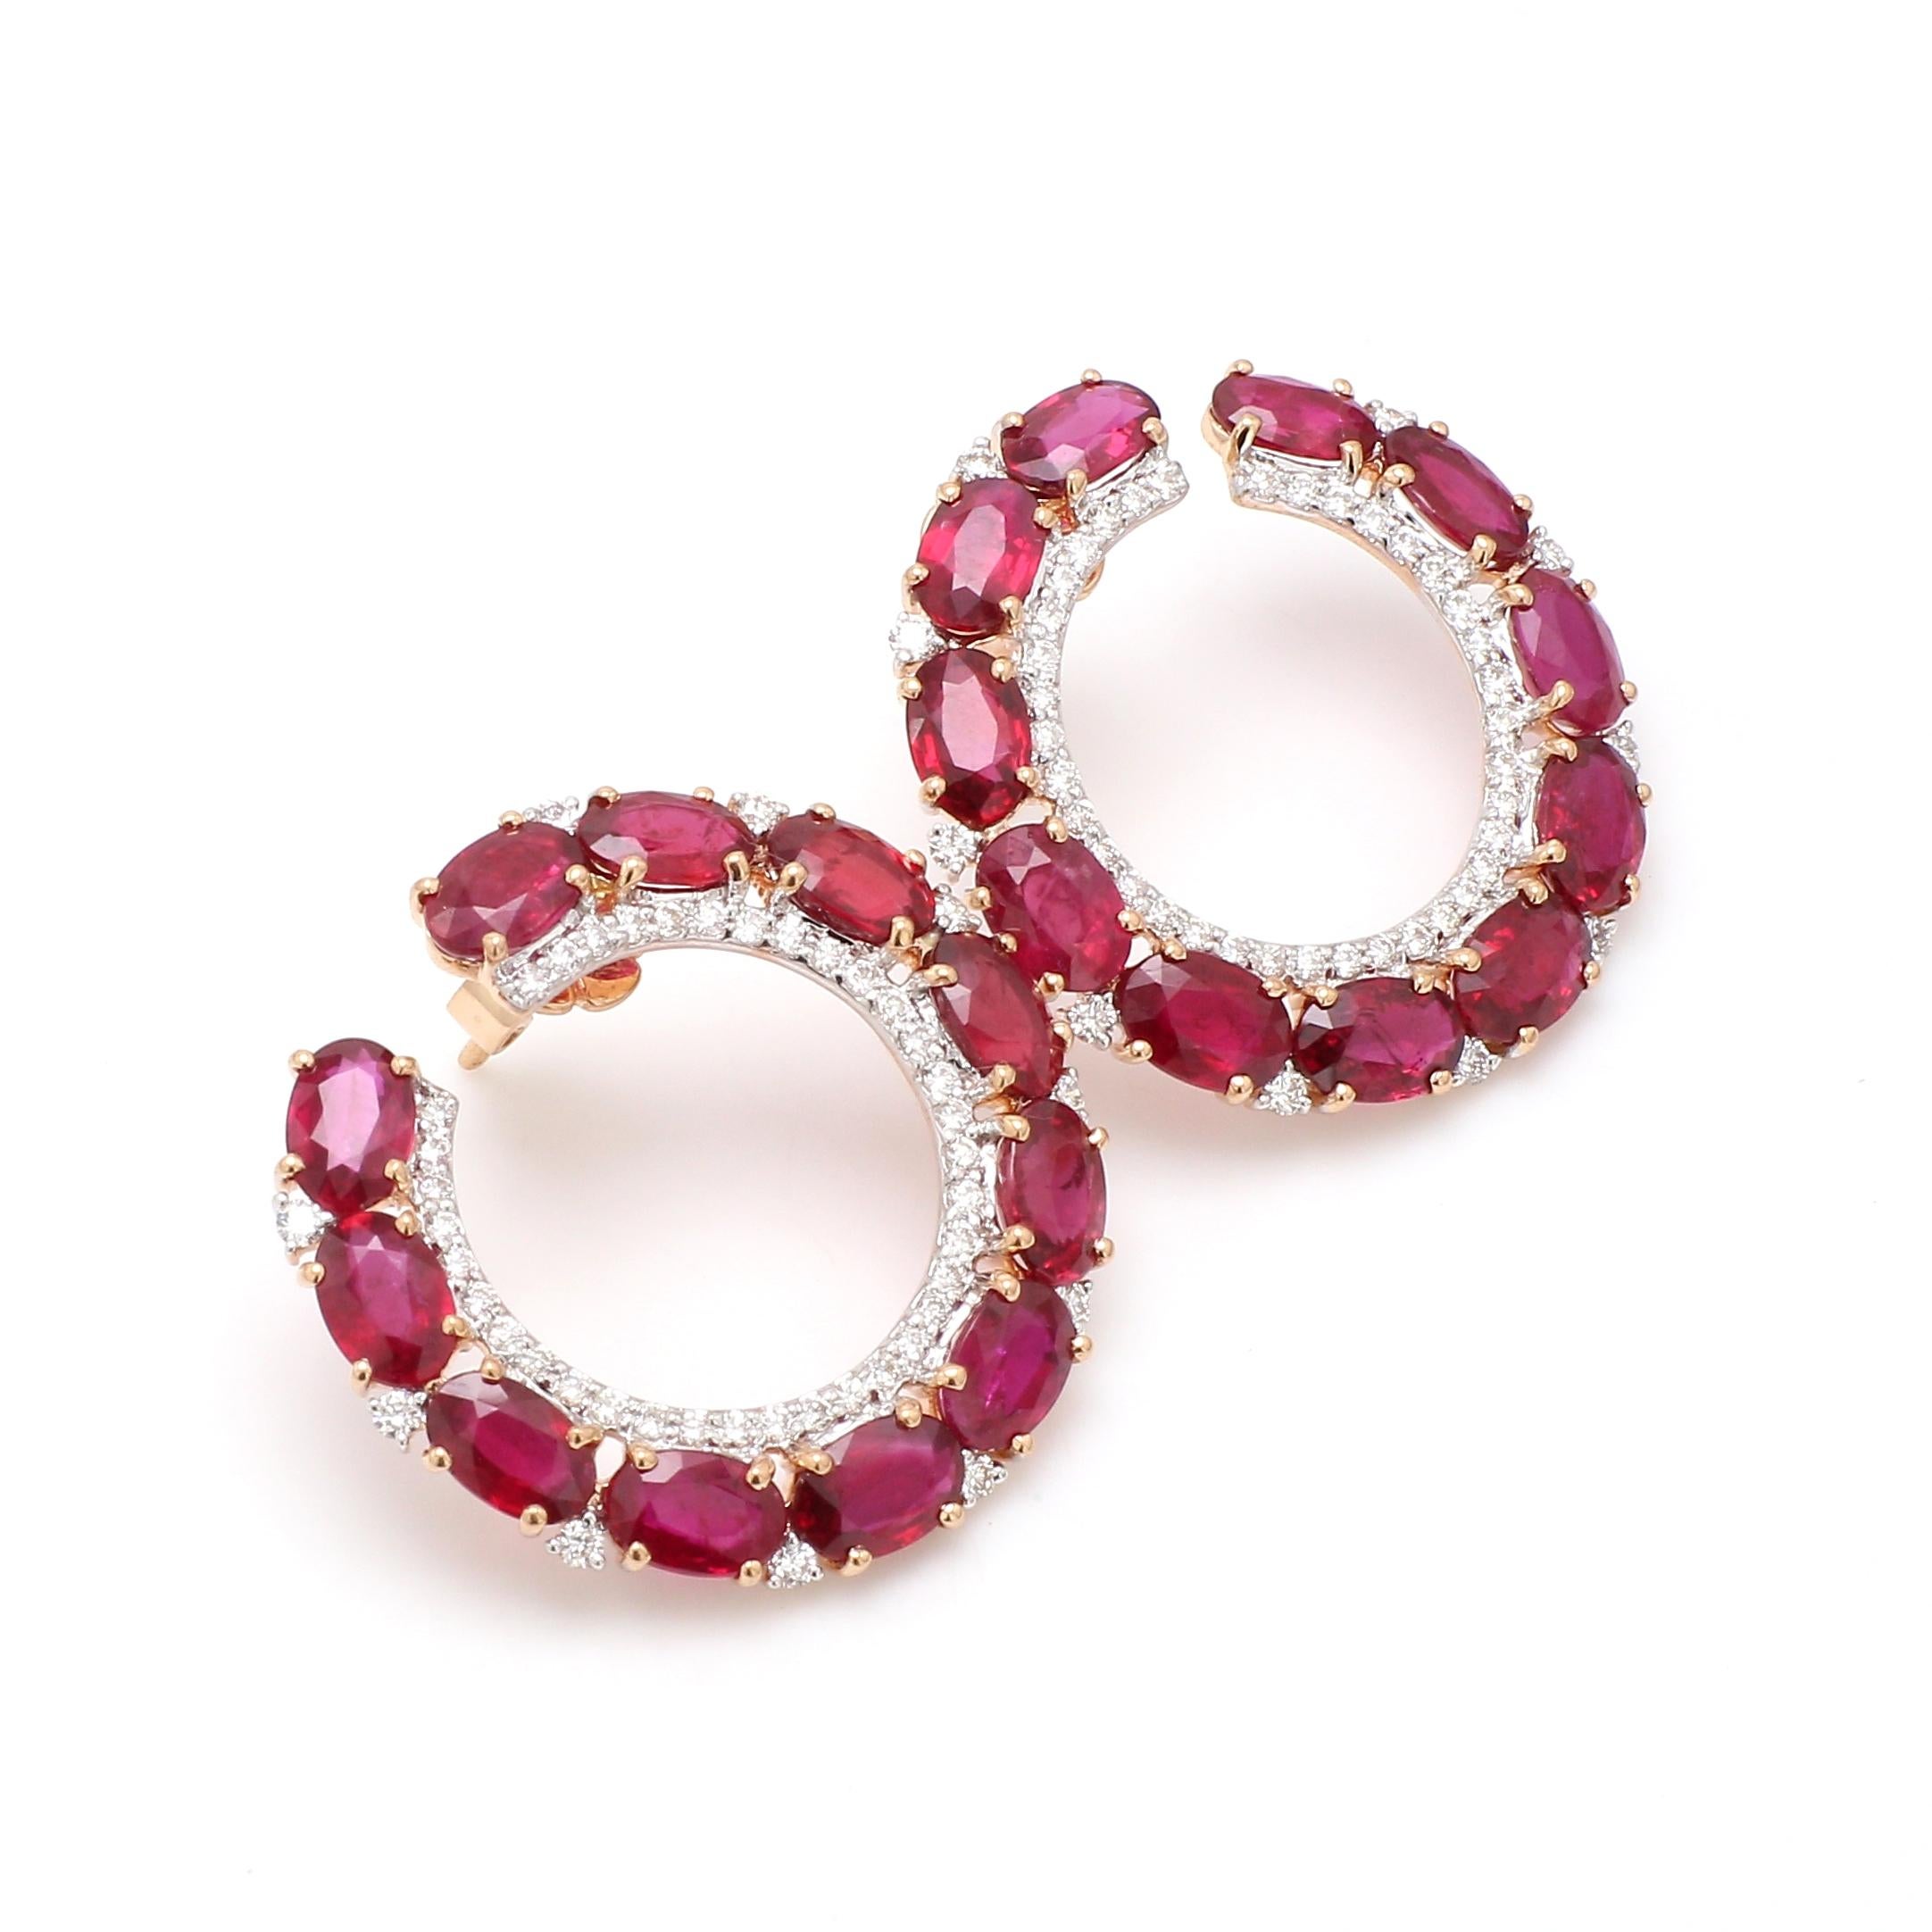 18 Karat Rose Gold Ruby and Diamond Contemporary Hoop Earrings

A vivid refined take on hoops; this frontal hoop style is intricately designed comprising of beautiful fiery red color rubies with the added layer of pave diamonds elegantly set in 18k